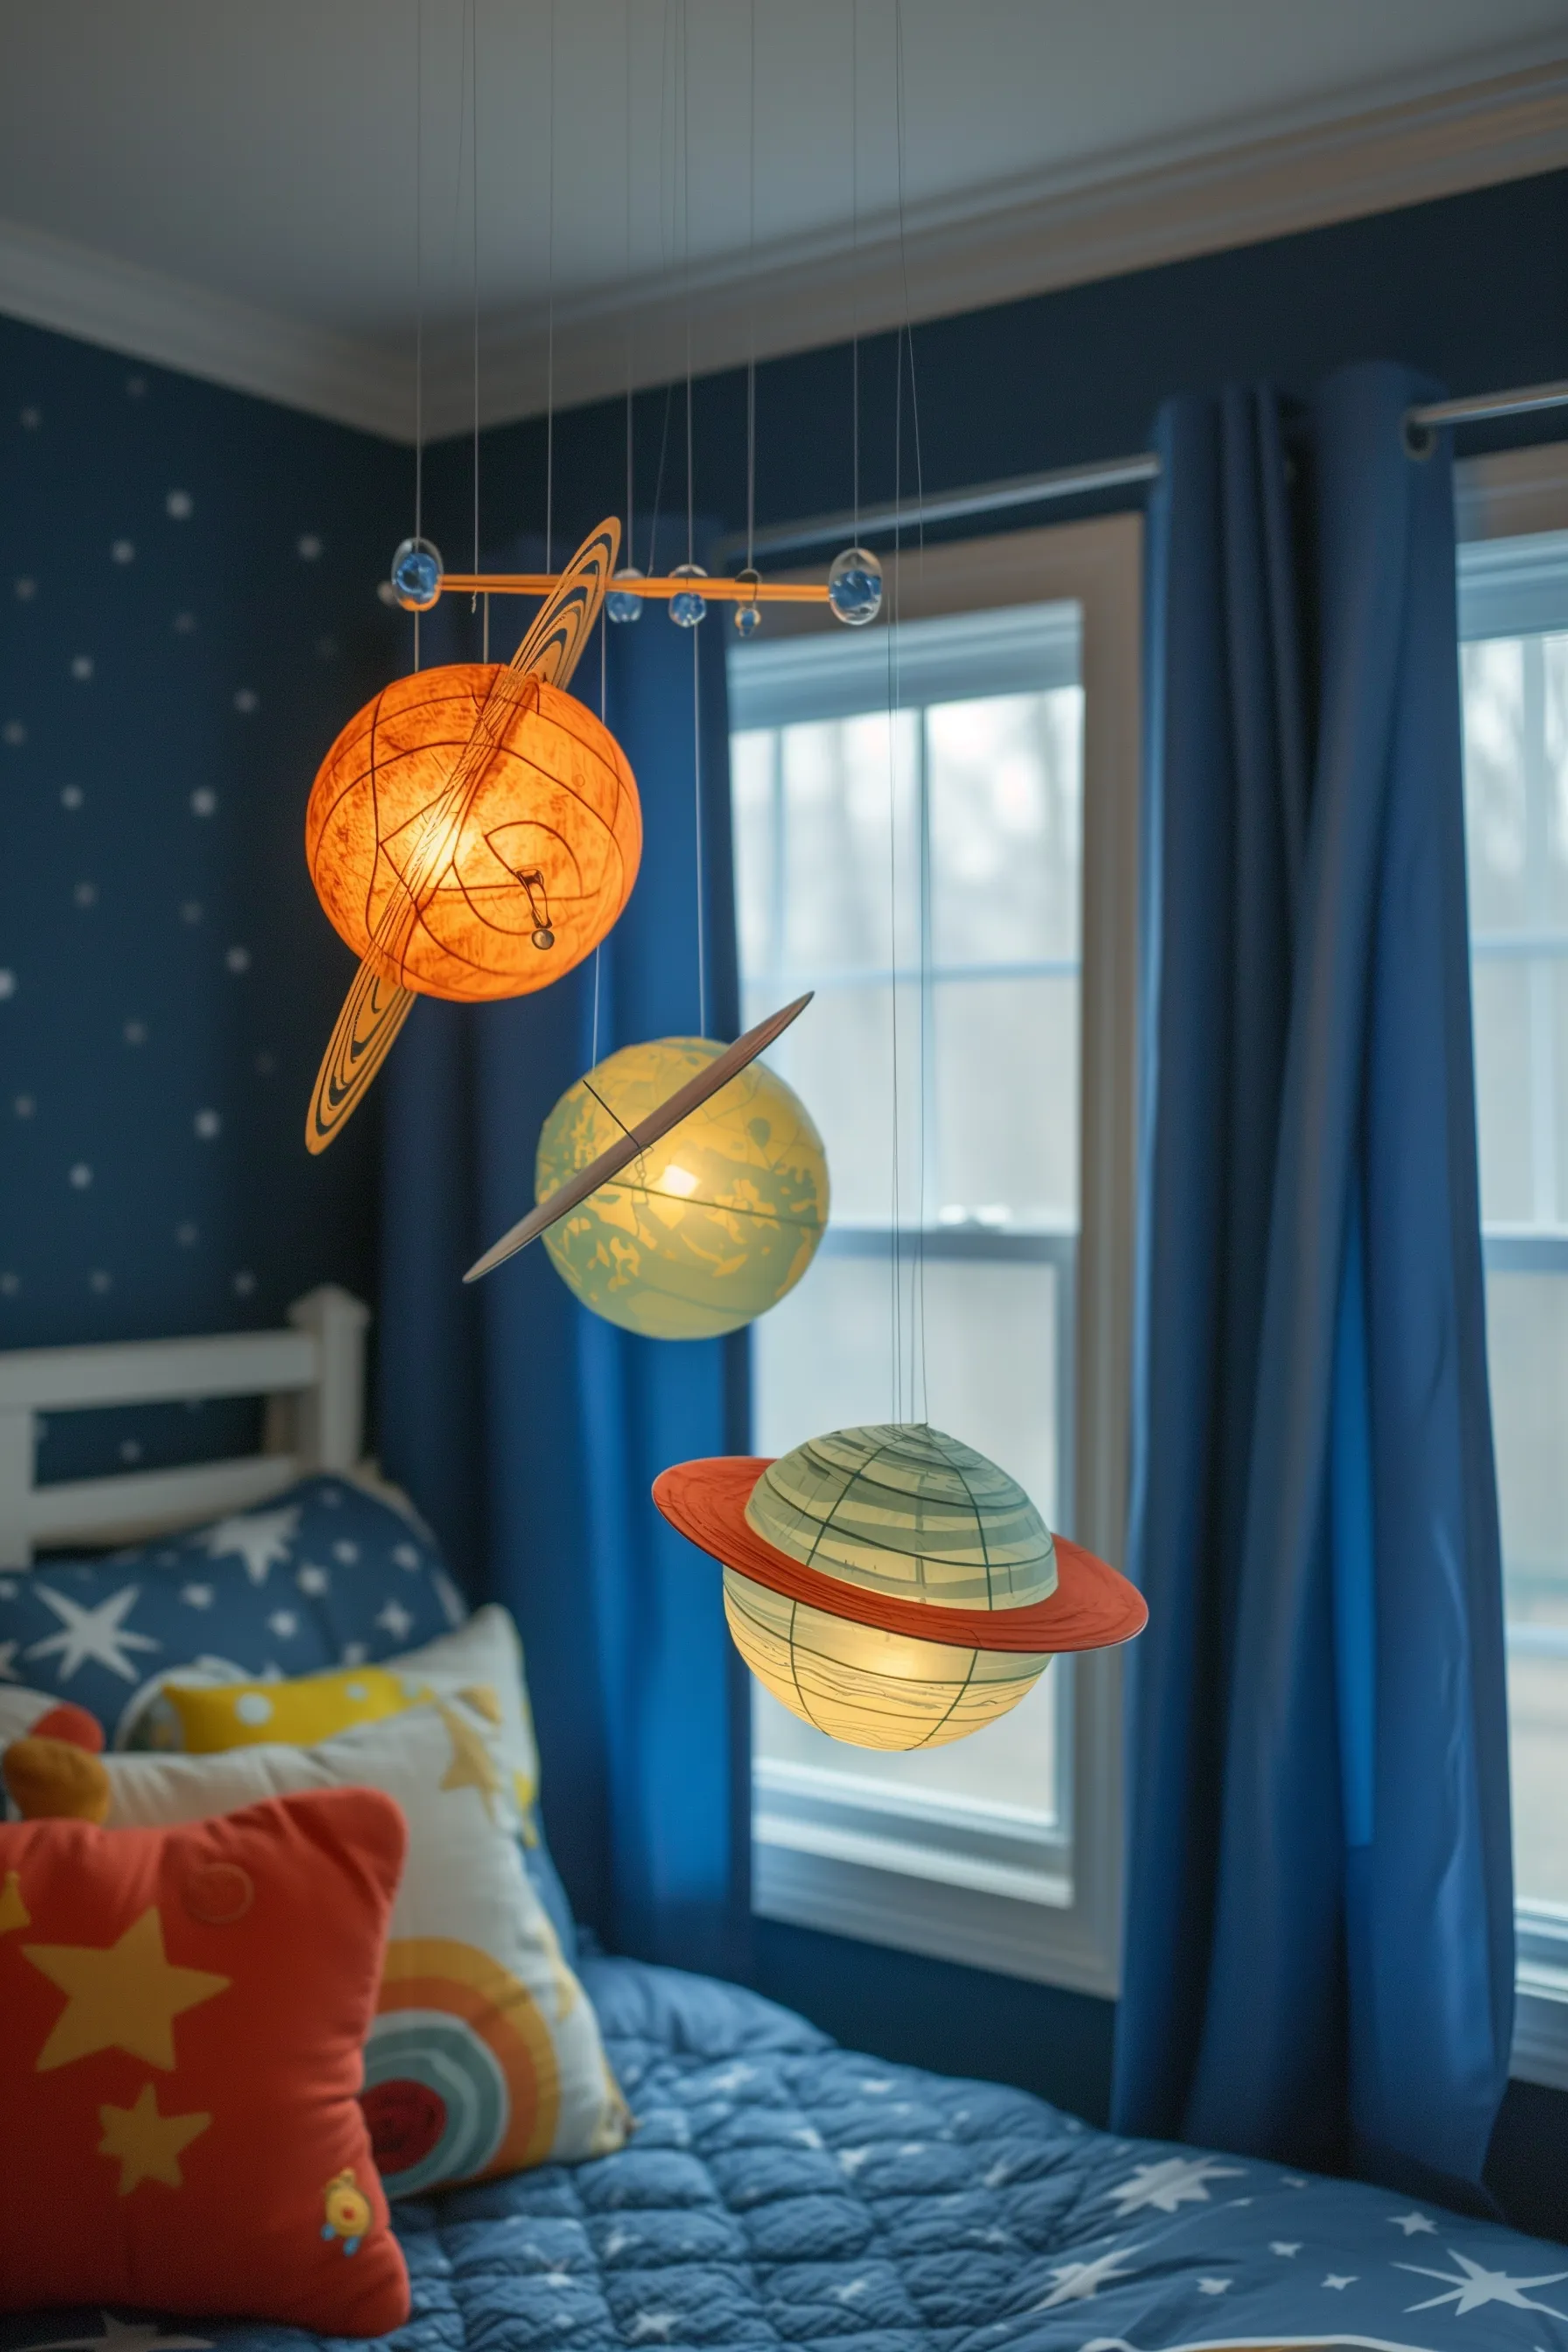 A space themed bunk bed with planets painted on it